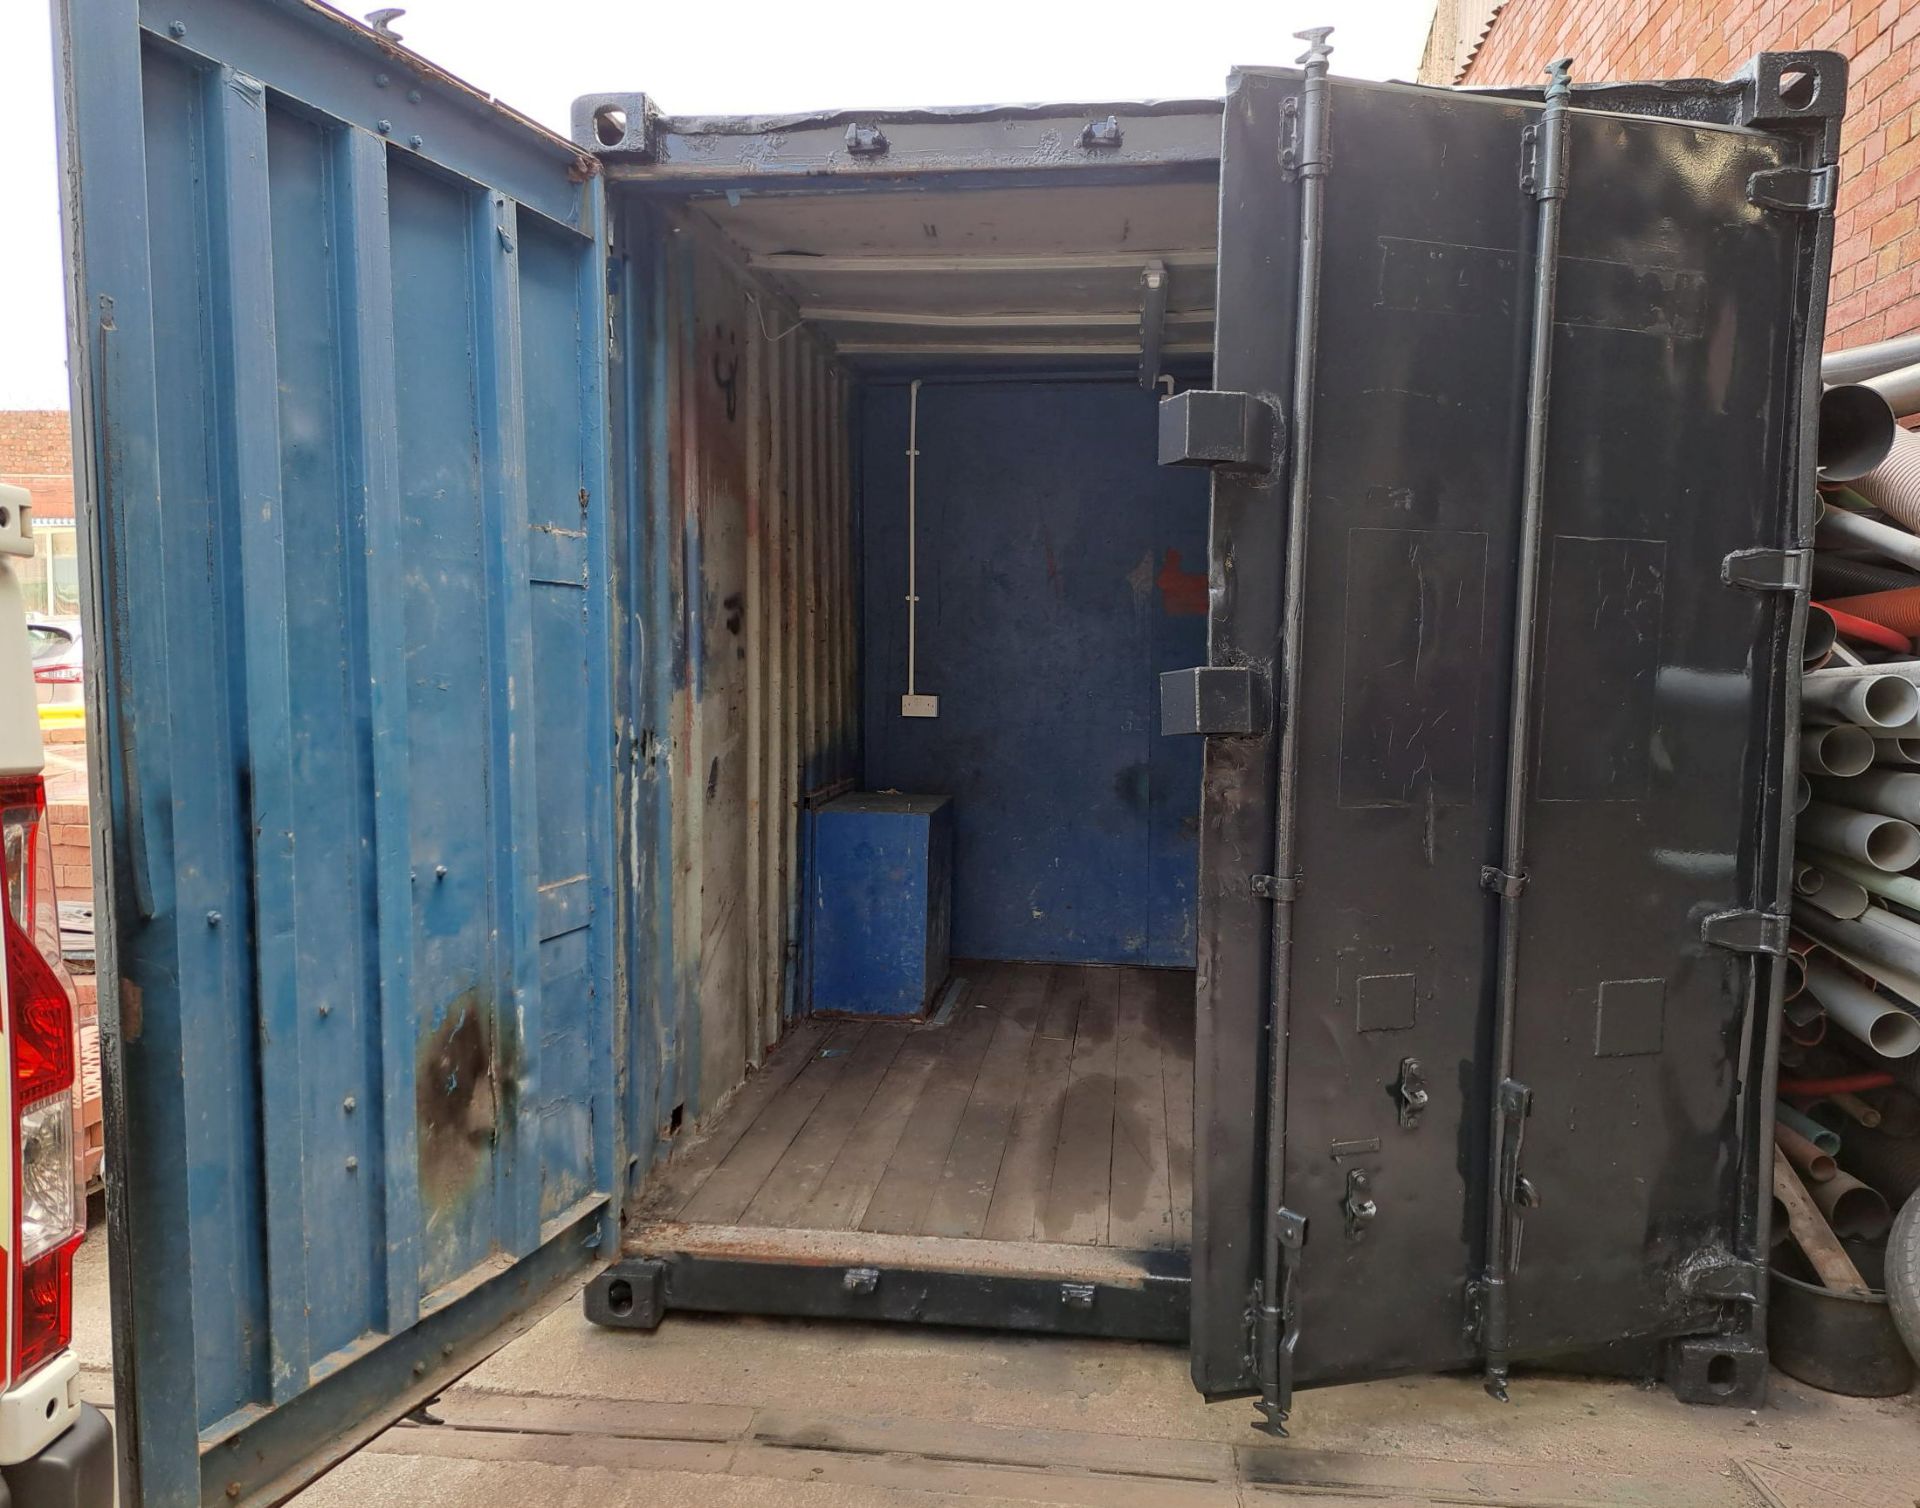 20'0" X 10'0" Lockable Steel Container - Ref: 76 - CL464 - Location: Liverpool L19 - Image 2 of 8